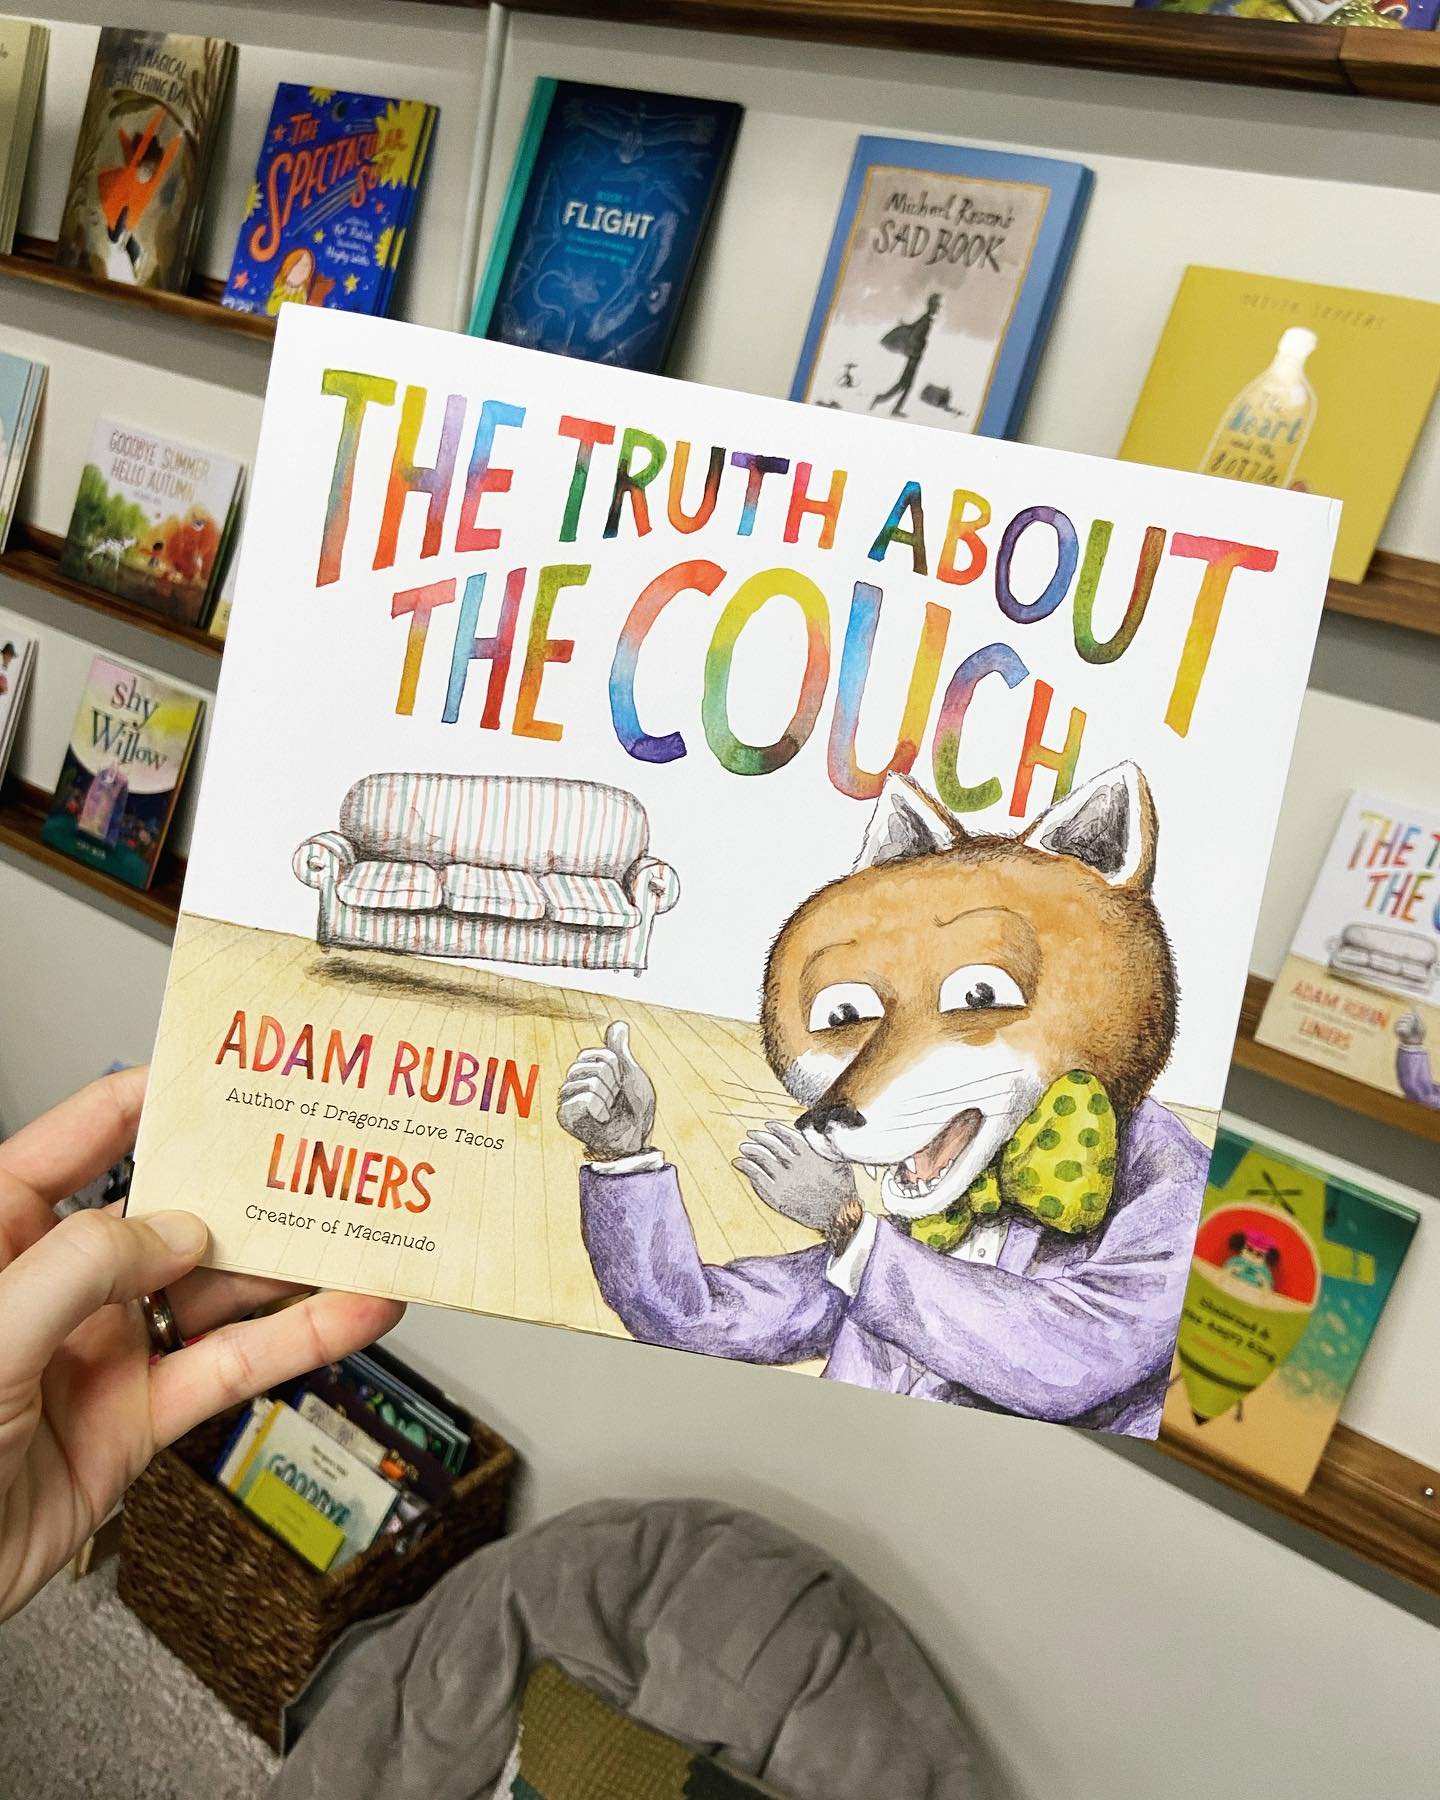 The duo of @porliniers and @rubingo_books is brilliant - and The Truth about the Couch is a huge winner folks! Just an absolutely fantastic looking book with the perfect amount of quirkiness and zaniness (a lot). 

It&rsquo;s funny in a well-deserved